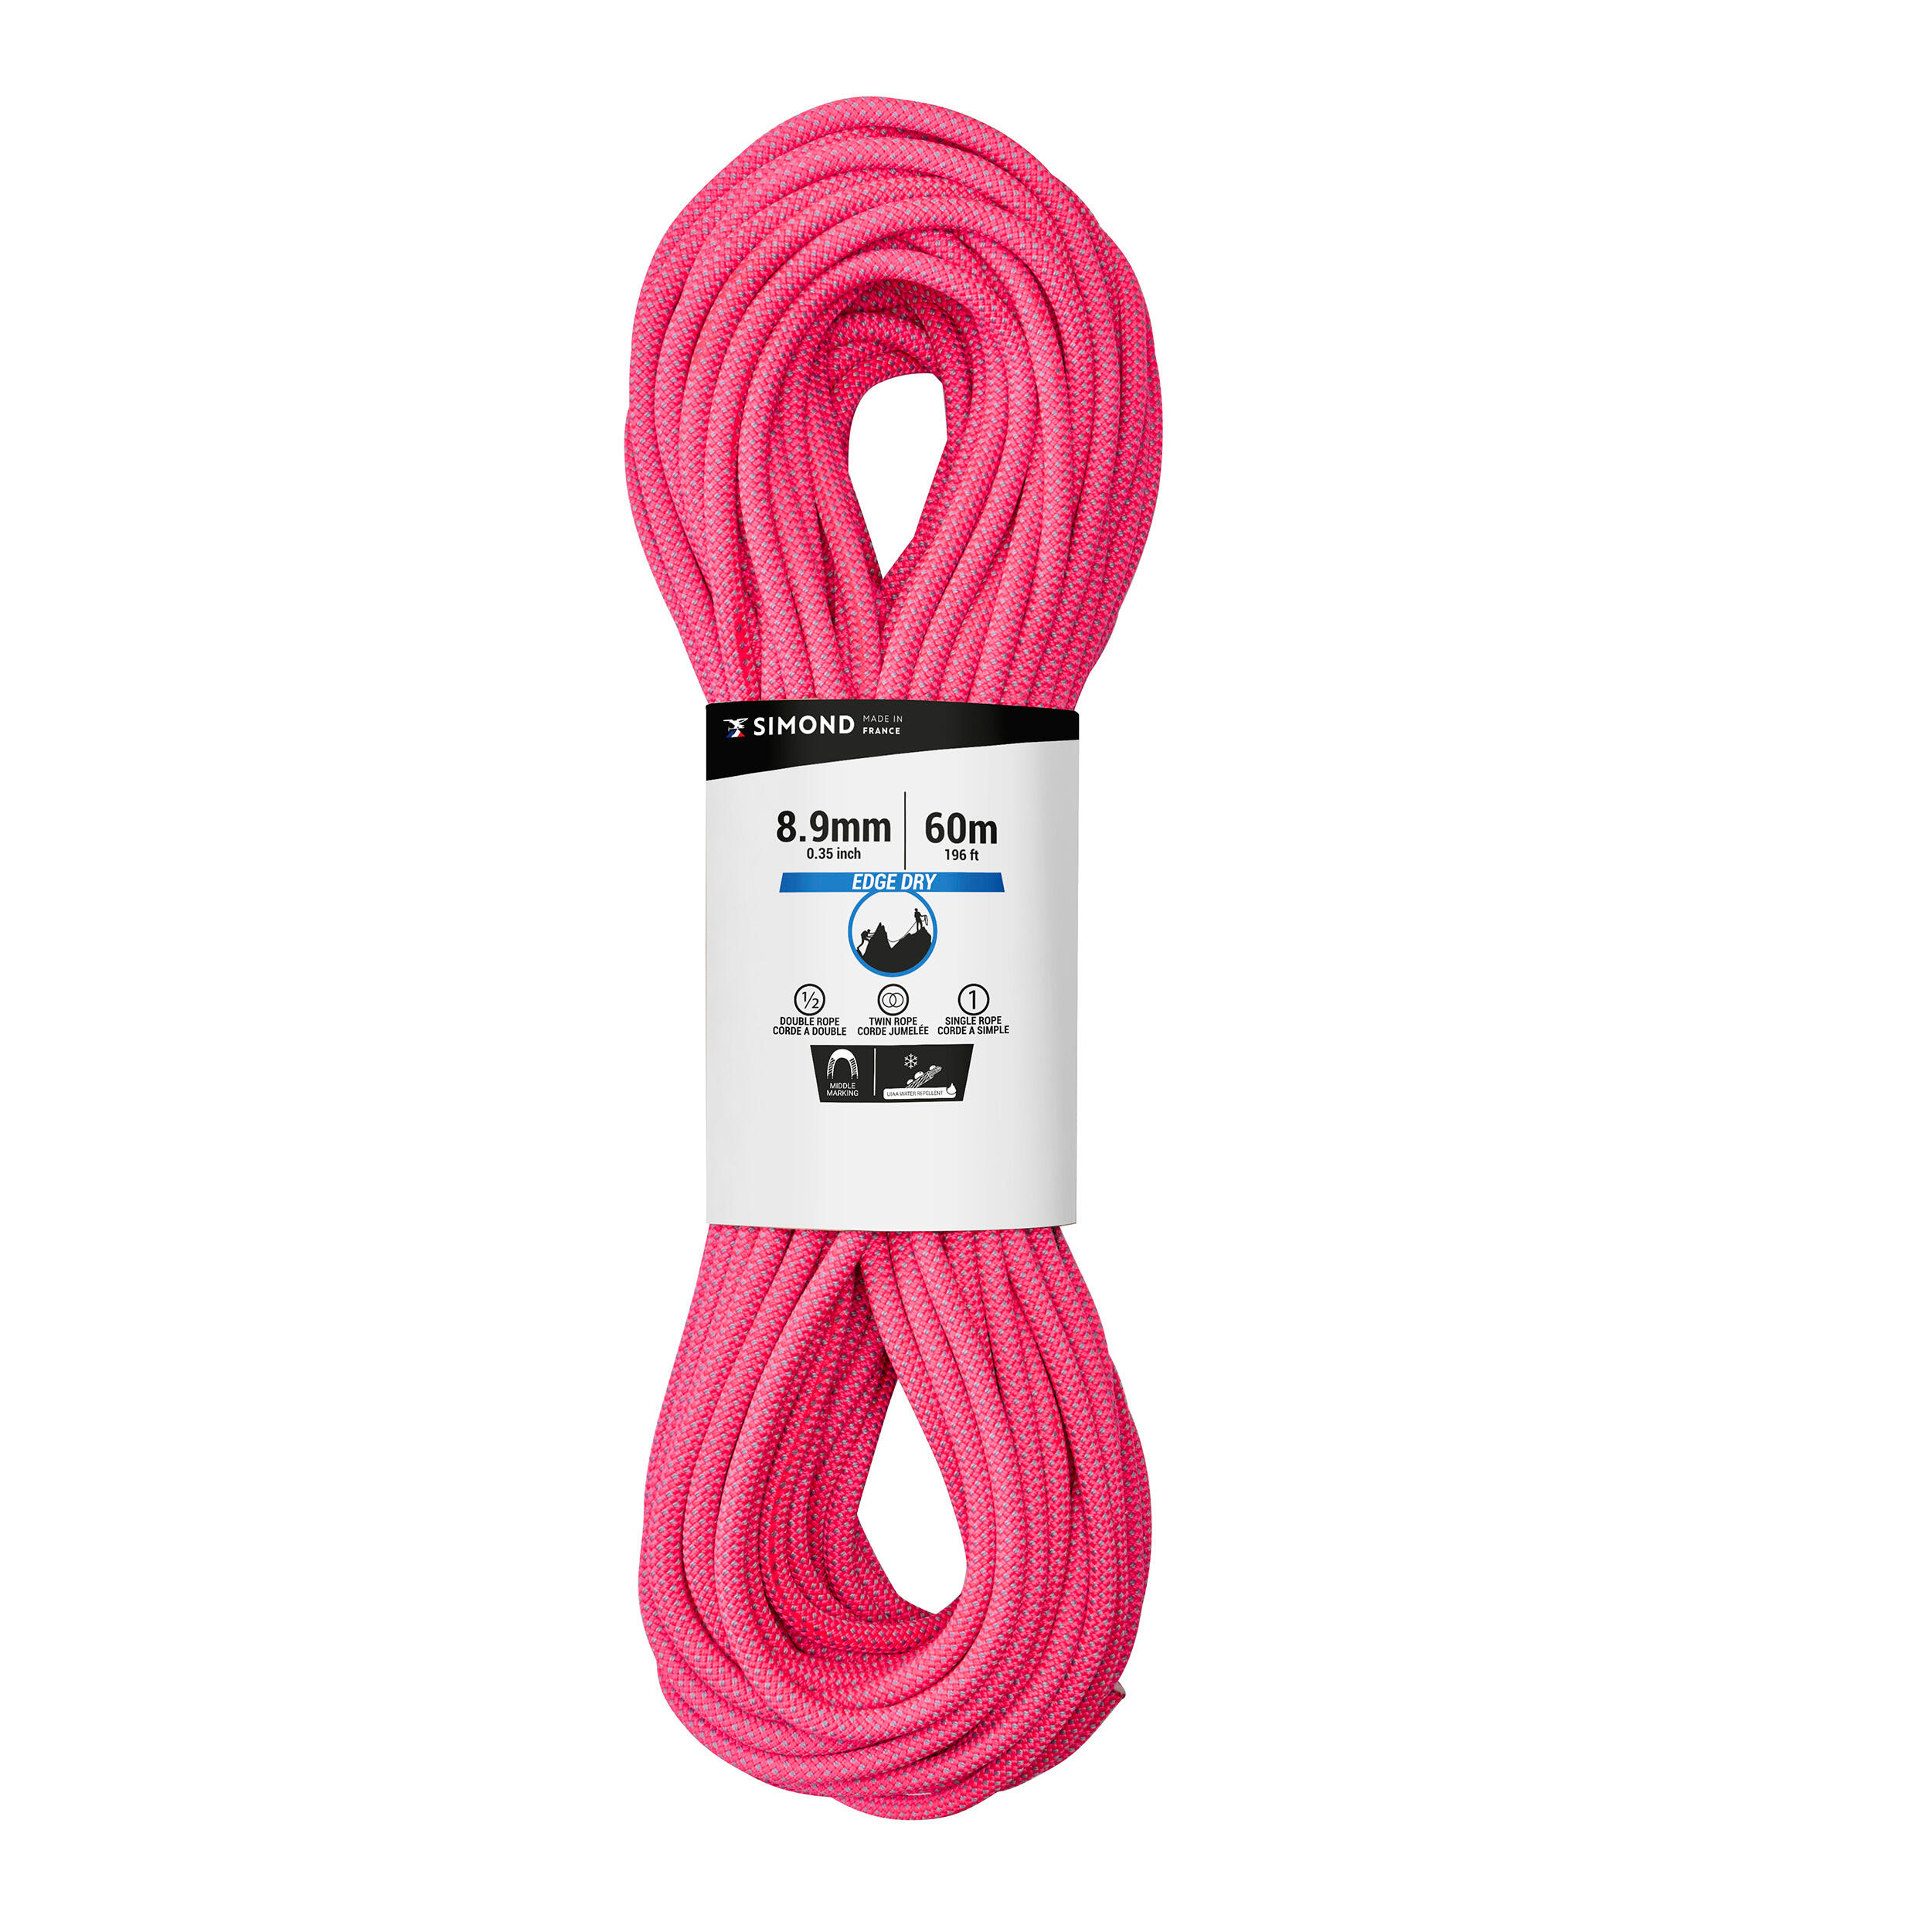 SIMOND CLIMBING AND MOUNTAINEERING TRIPLE ROPE STANDARD 8.9 mm x 60 m - EDGE DRY PINK